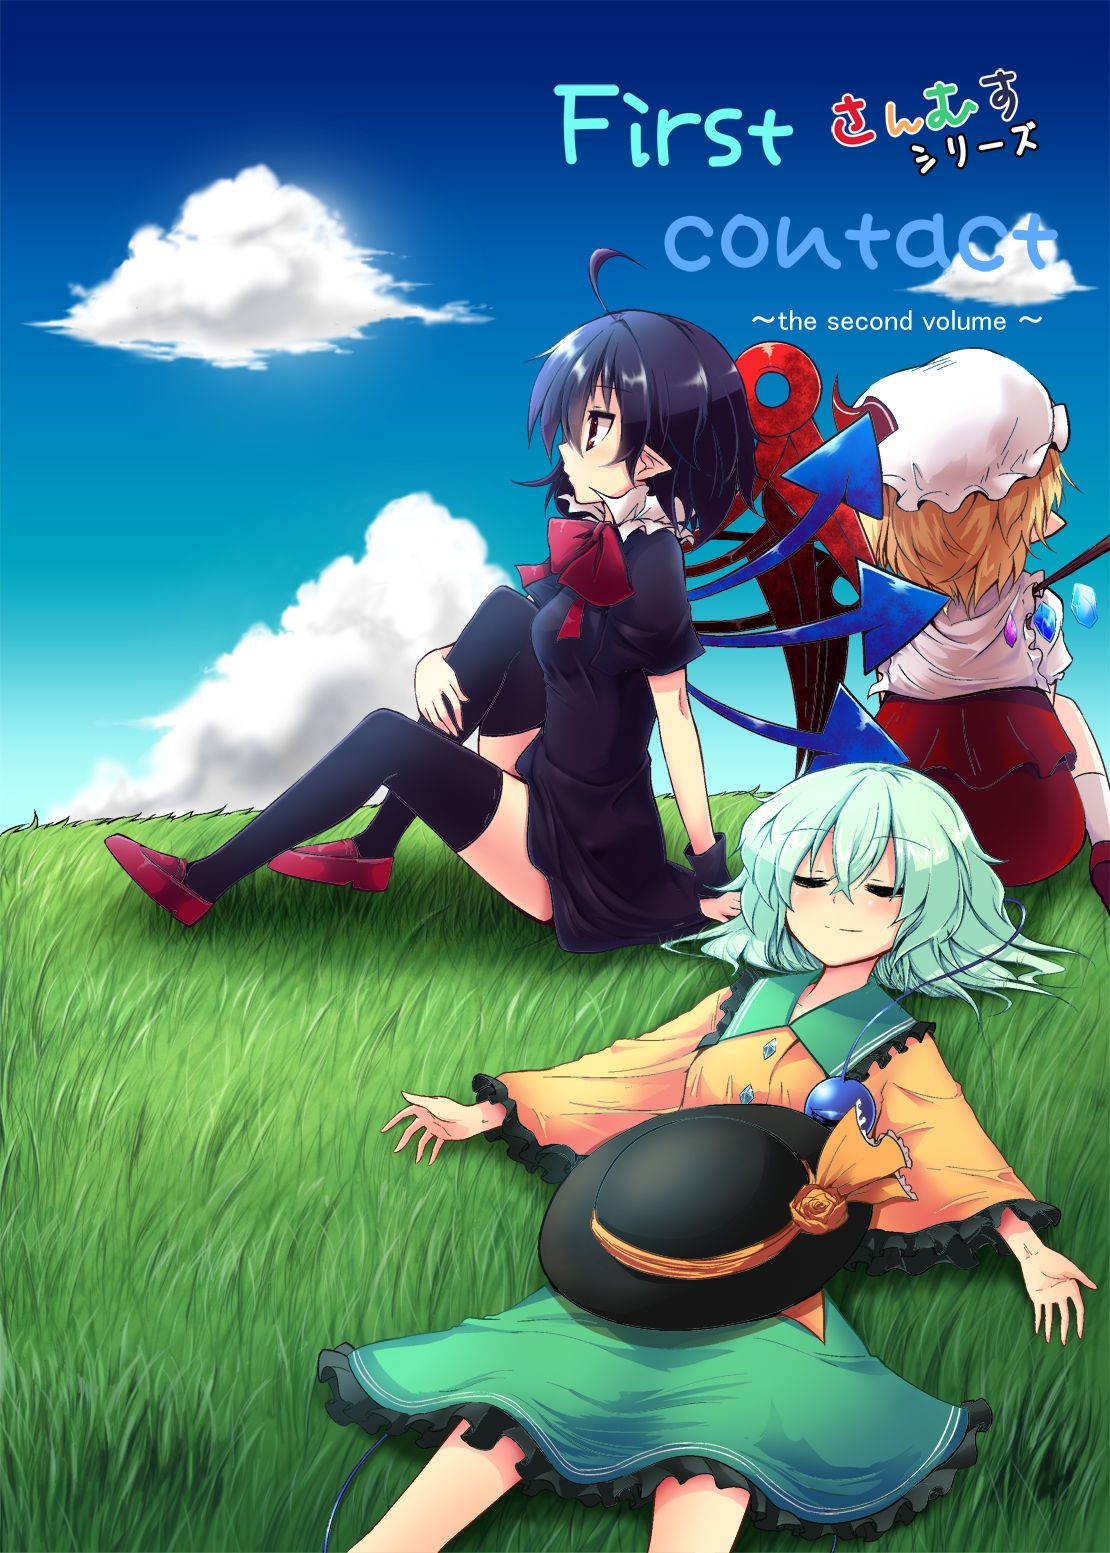 [Arutana (Chipa)] First contact ~the second volume~ (Touhou Project) [Digital] 0